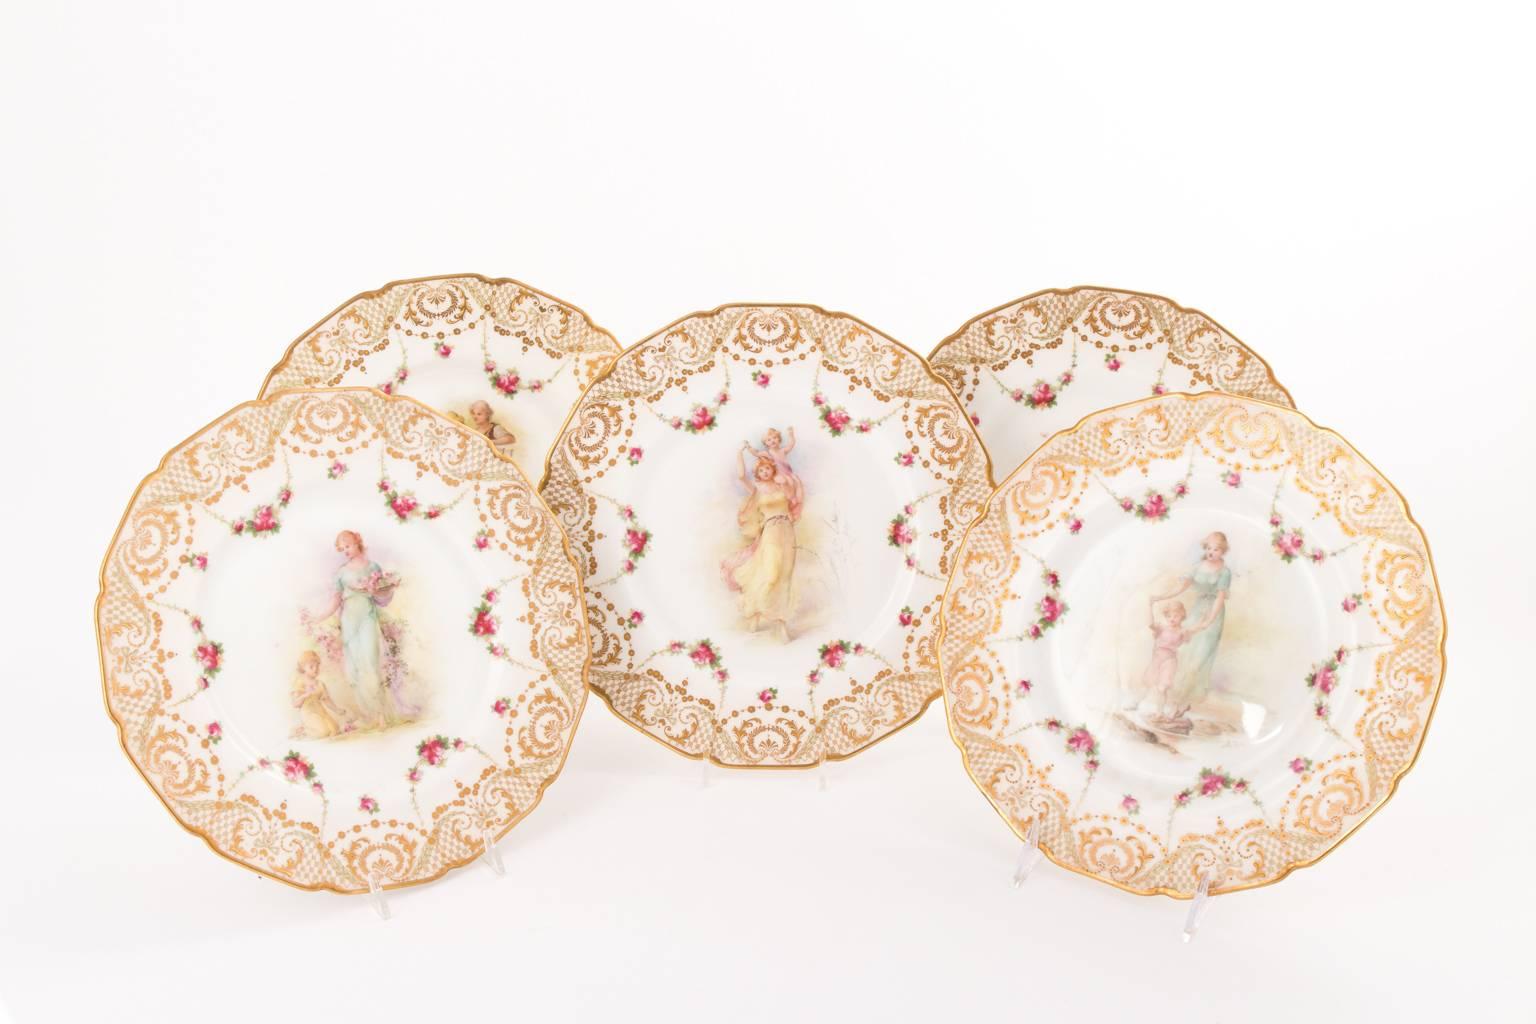 Set of Decorative Service Plates In Good Condition For Sale In Stamford, CT